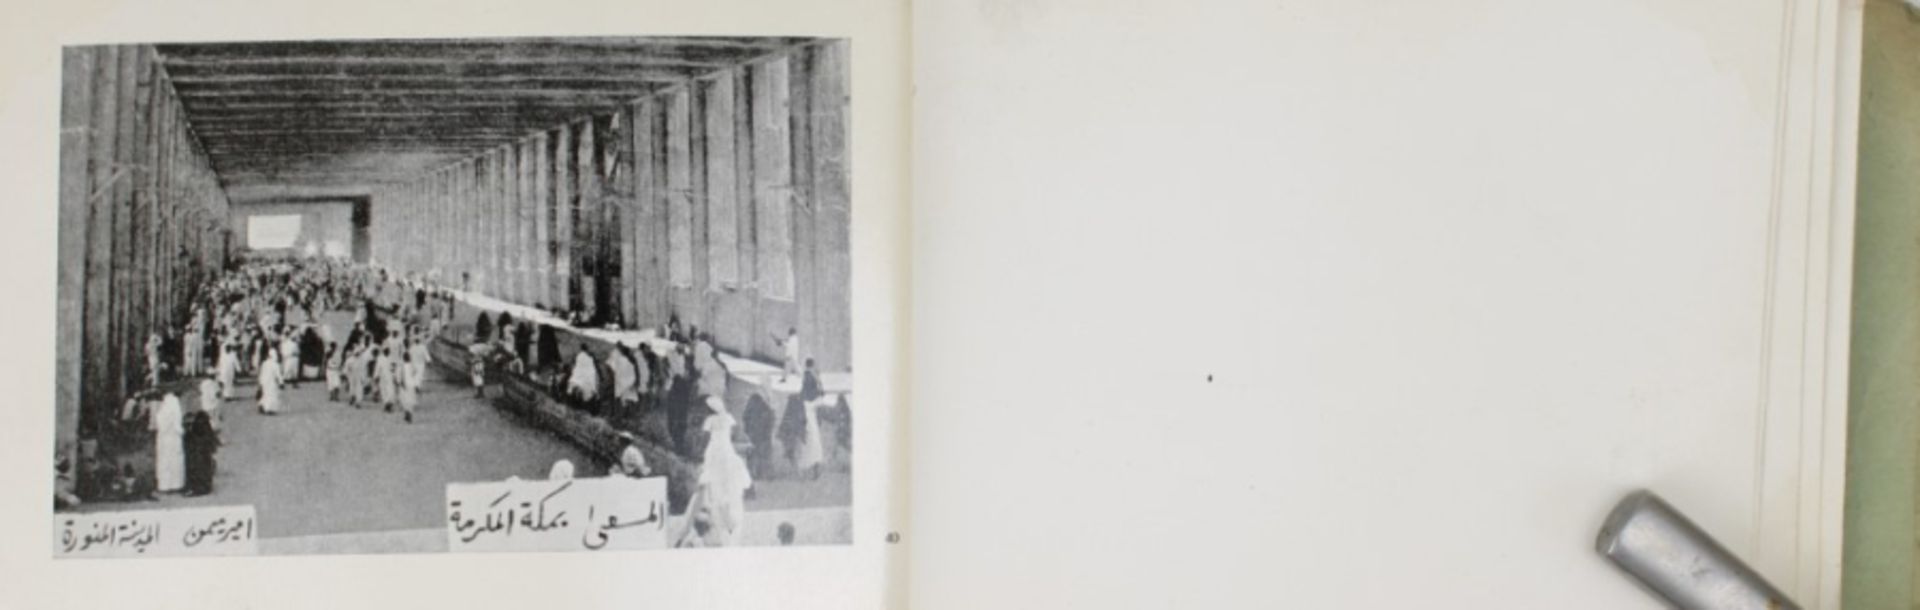 1930 Album with photographs of Mecca - Image 8 of 24